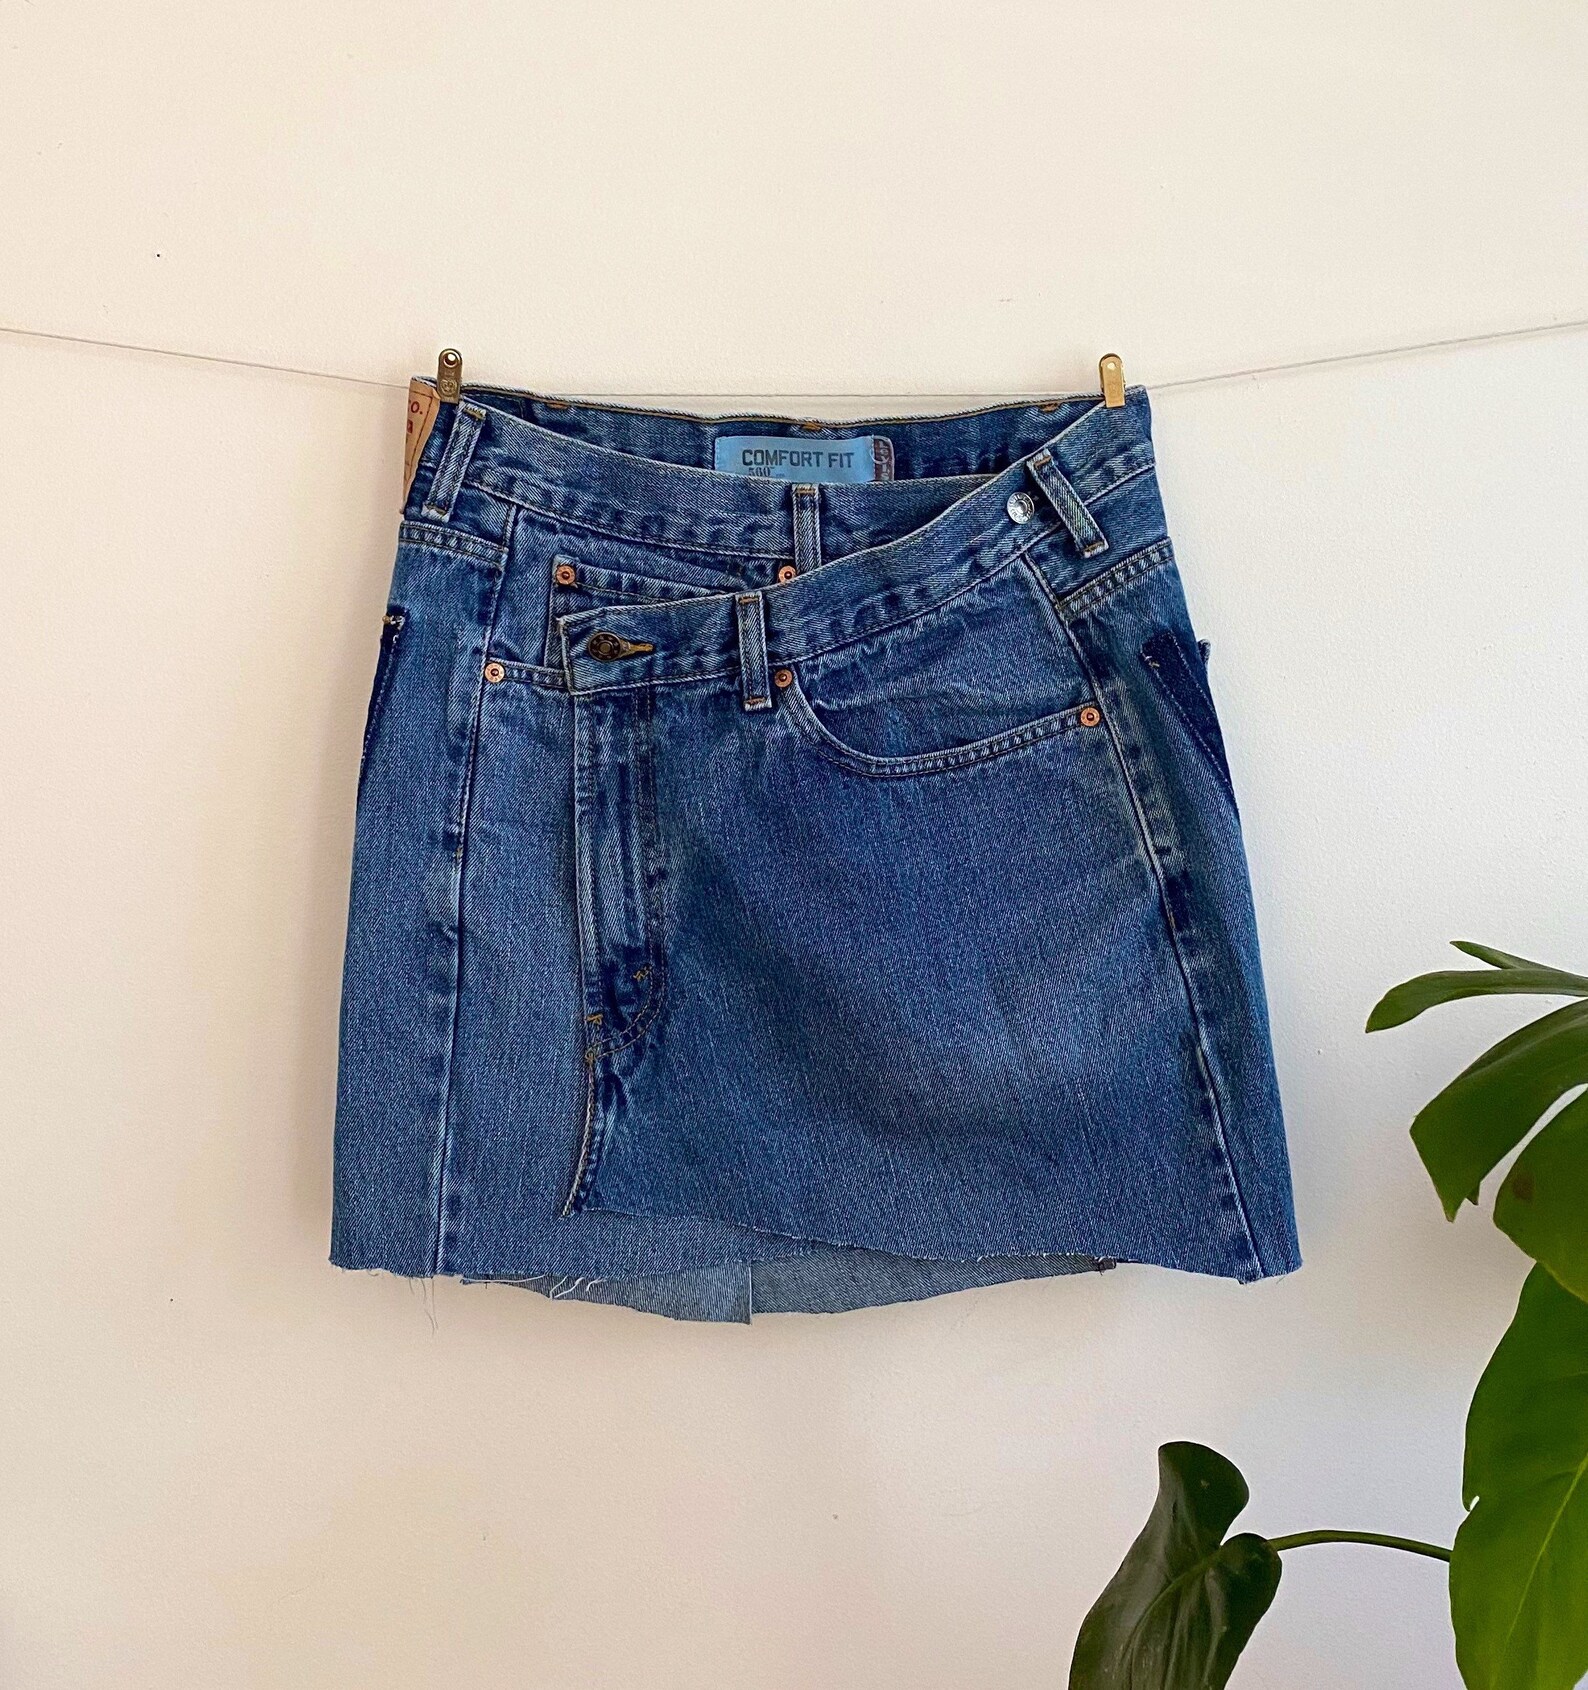 Reworked Levis Crossover Jean Skirt - Etsy